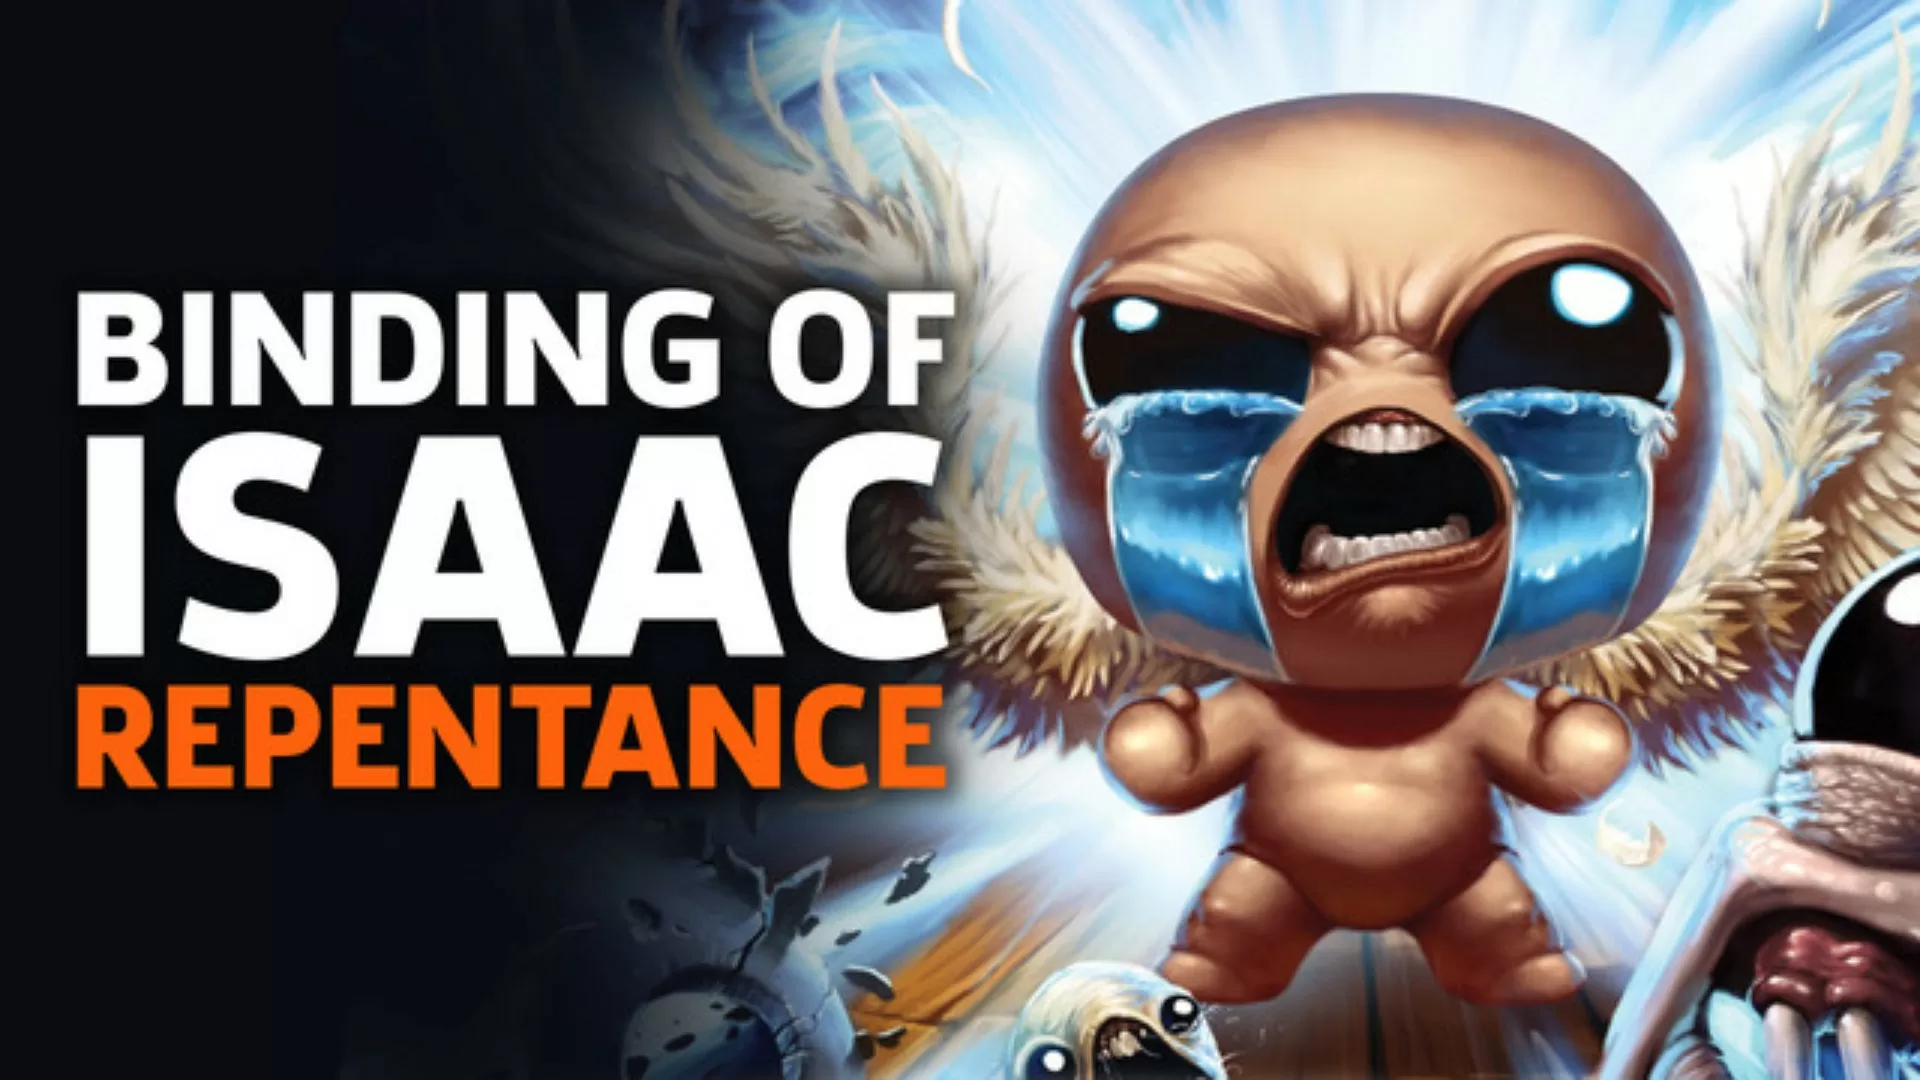 The Binding Of Isaac: Repentance mostrato in un gameplay inedito!